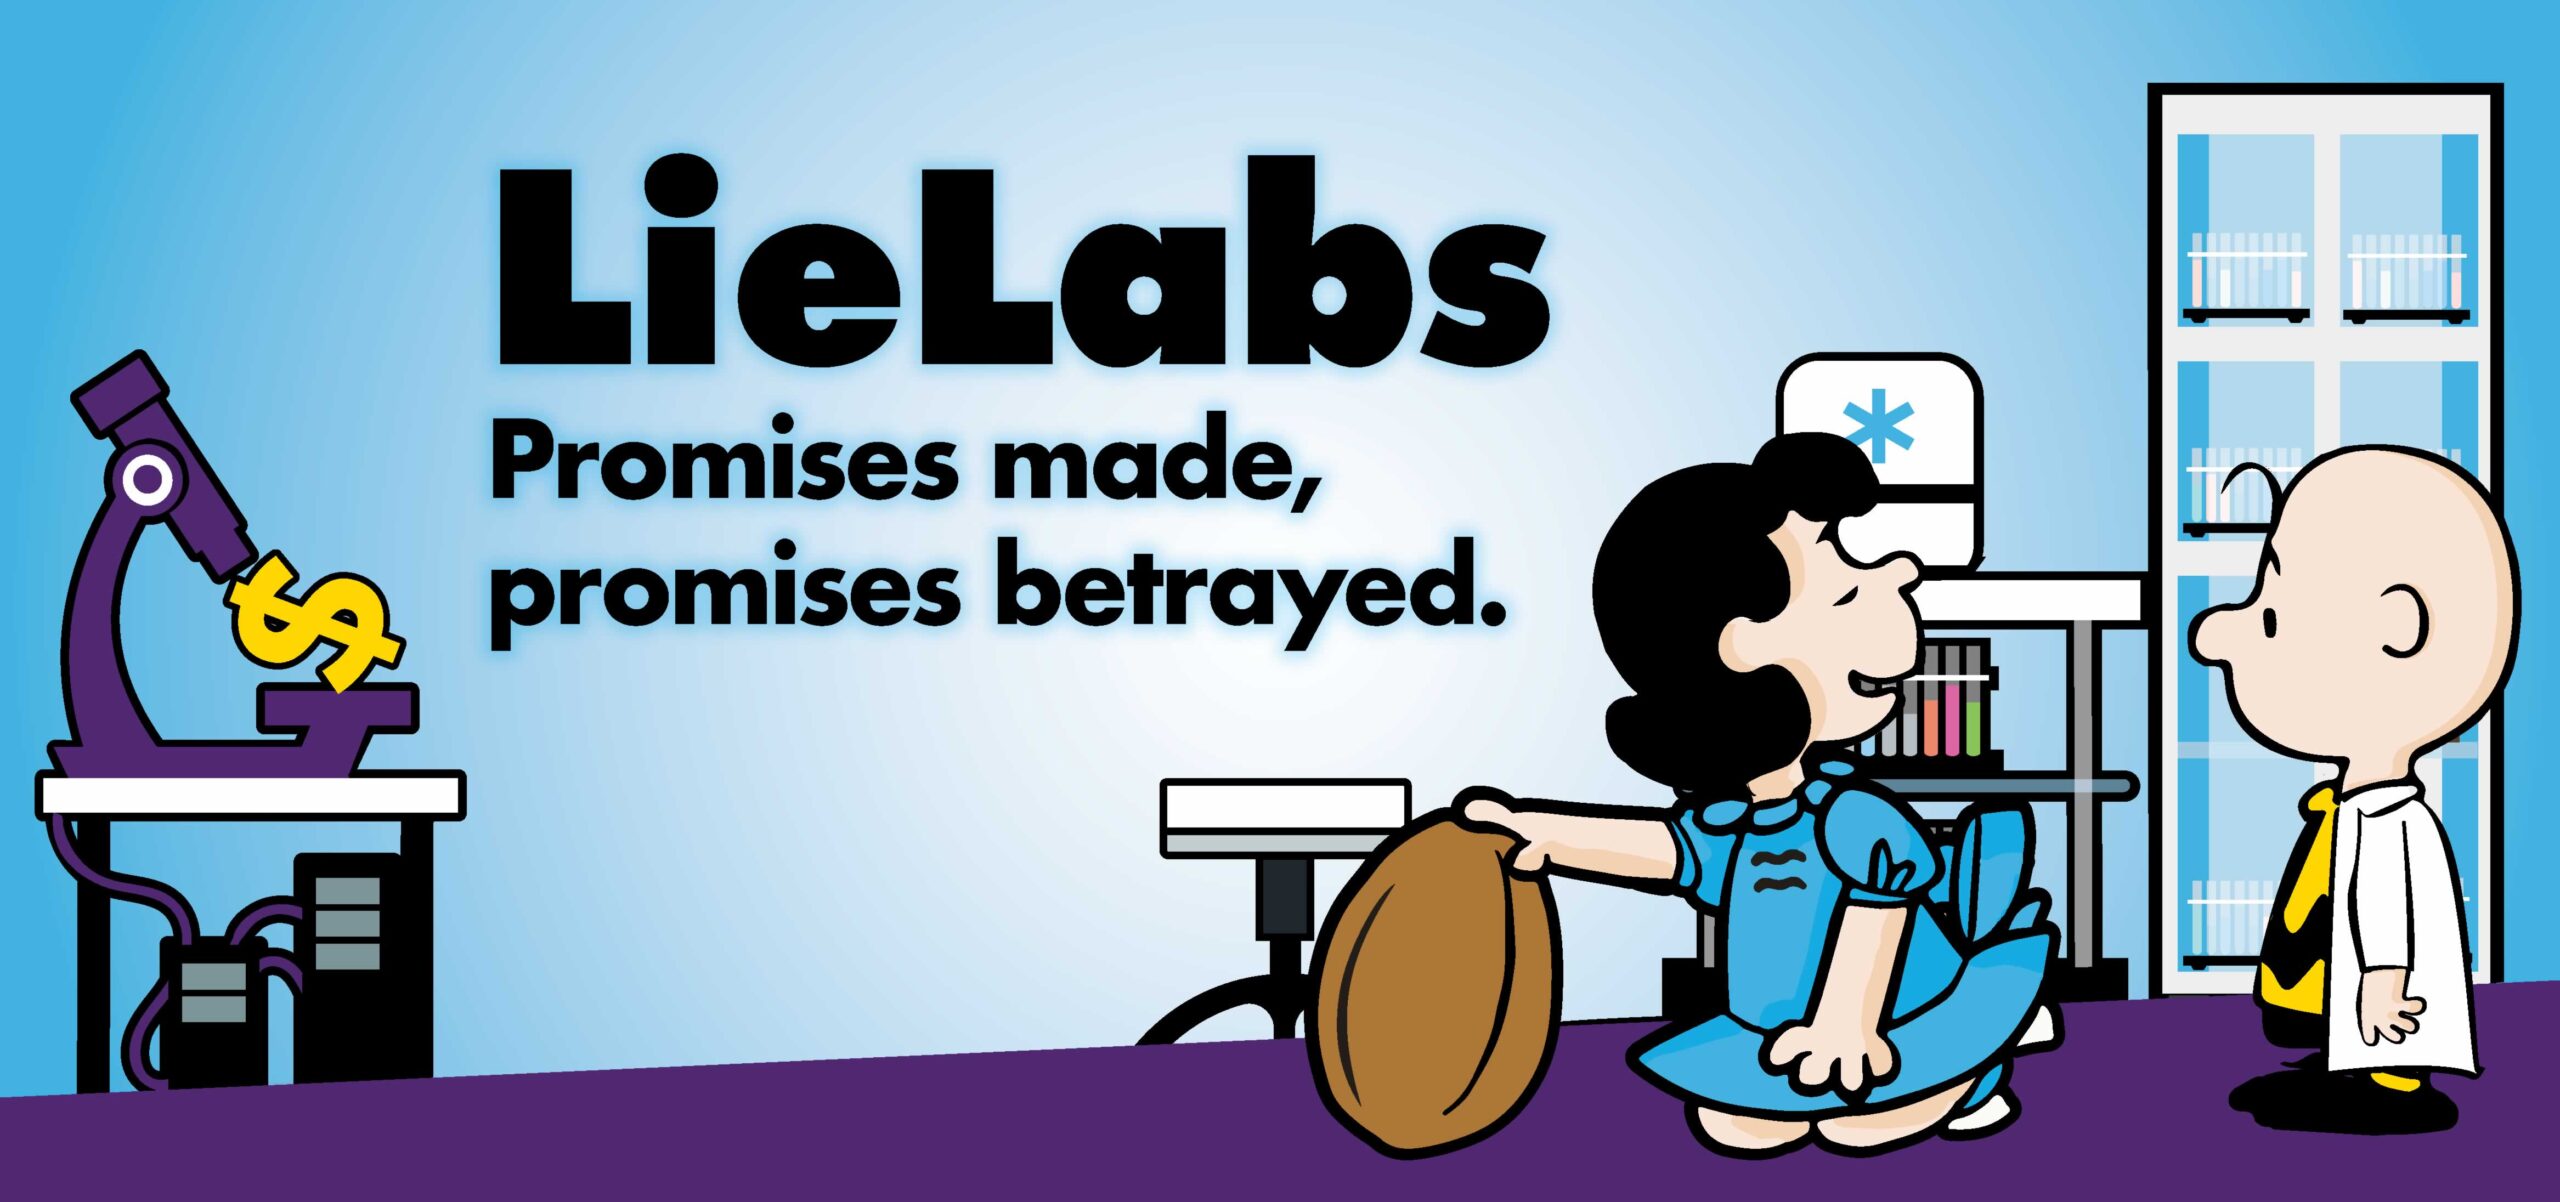 Lie Labs Promises made, promises betrayed